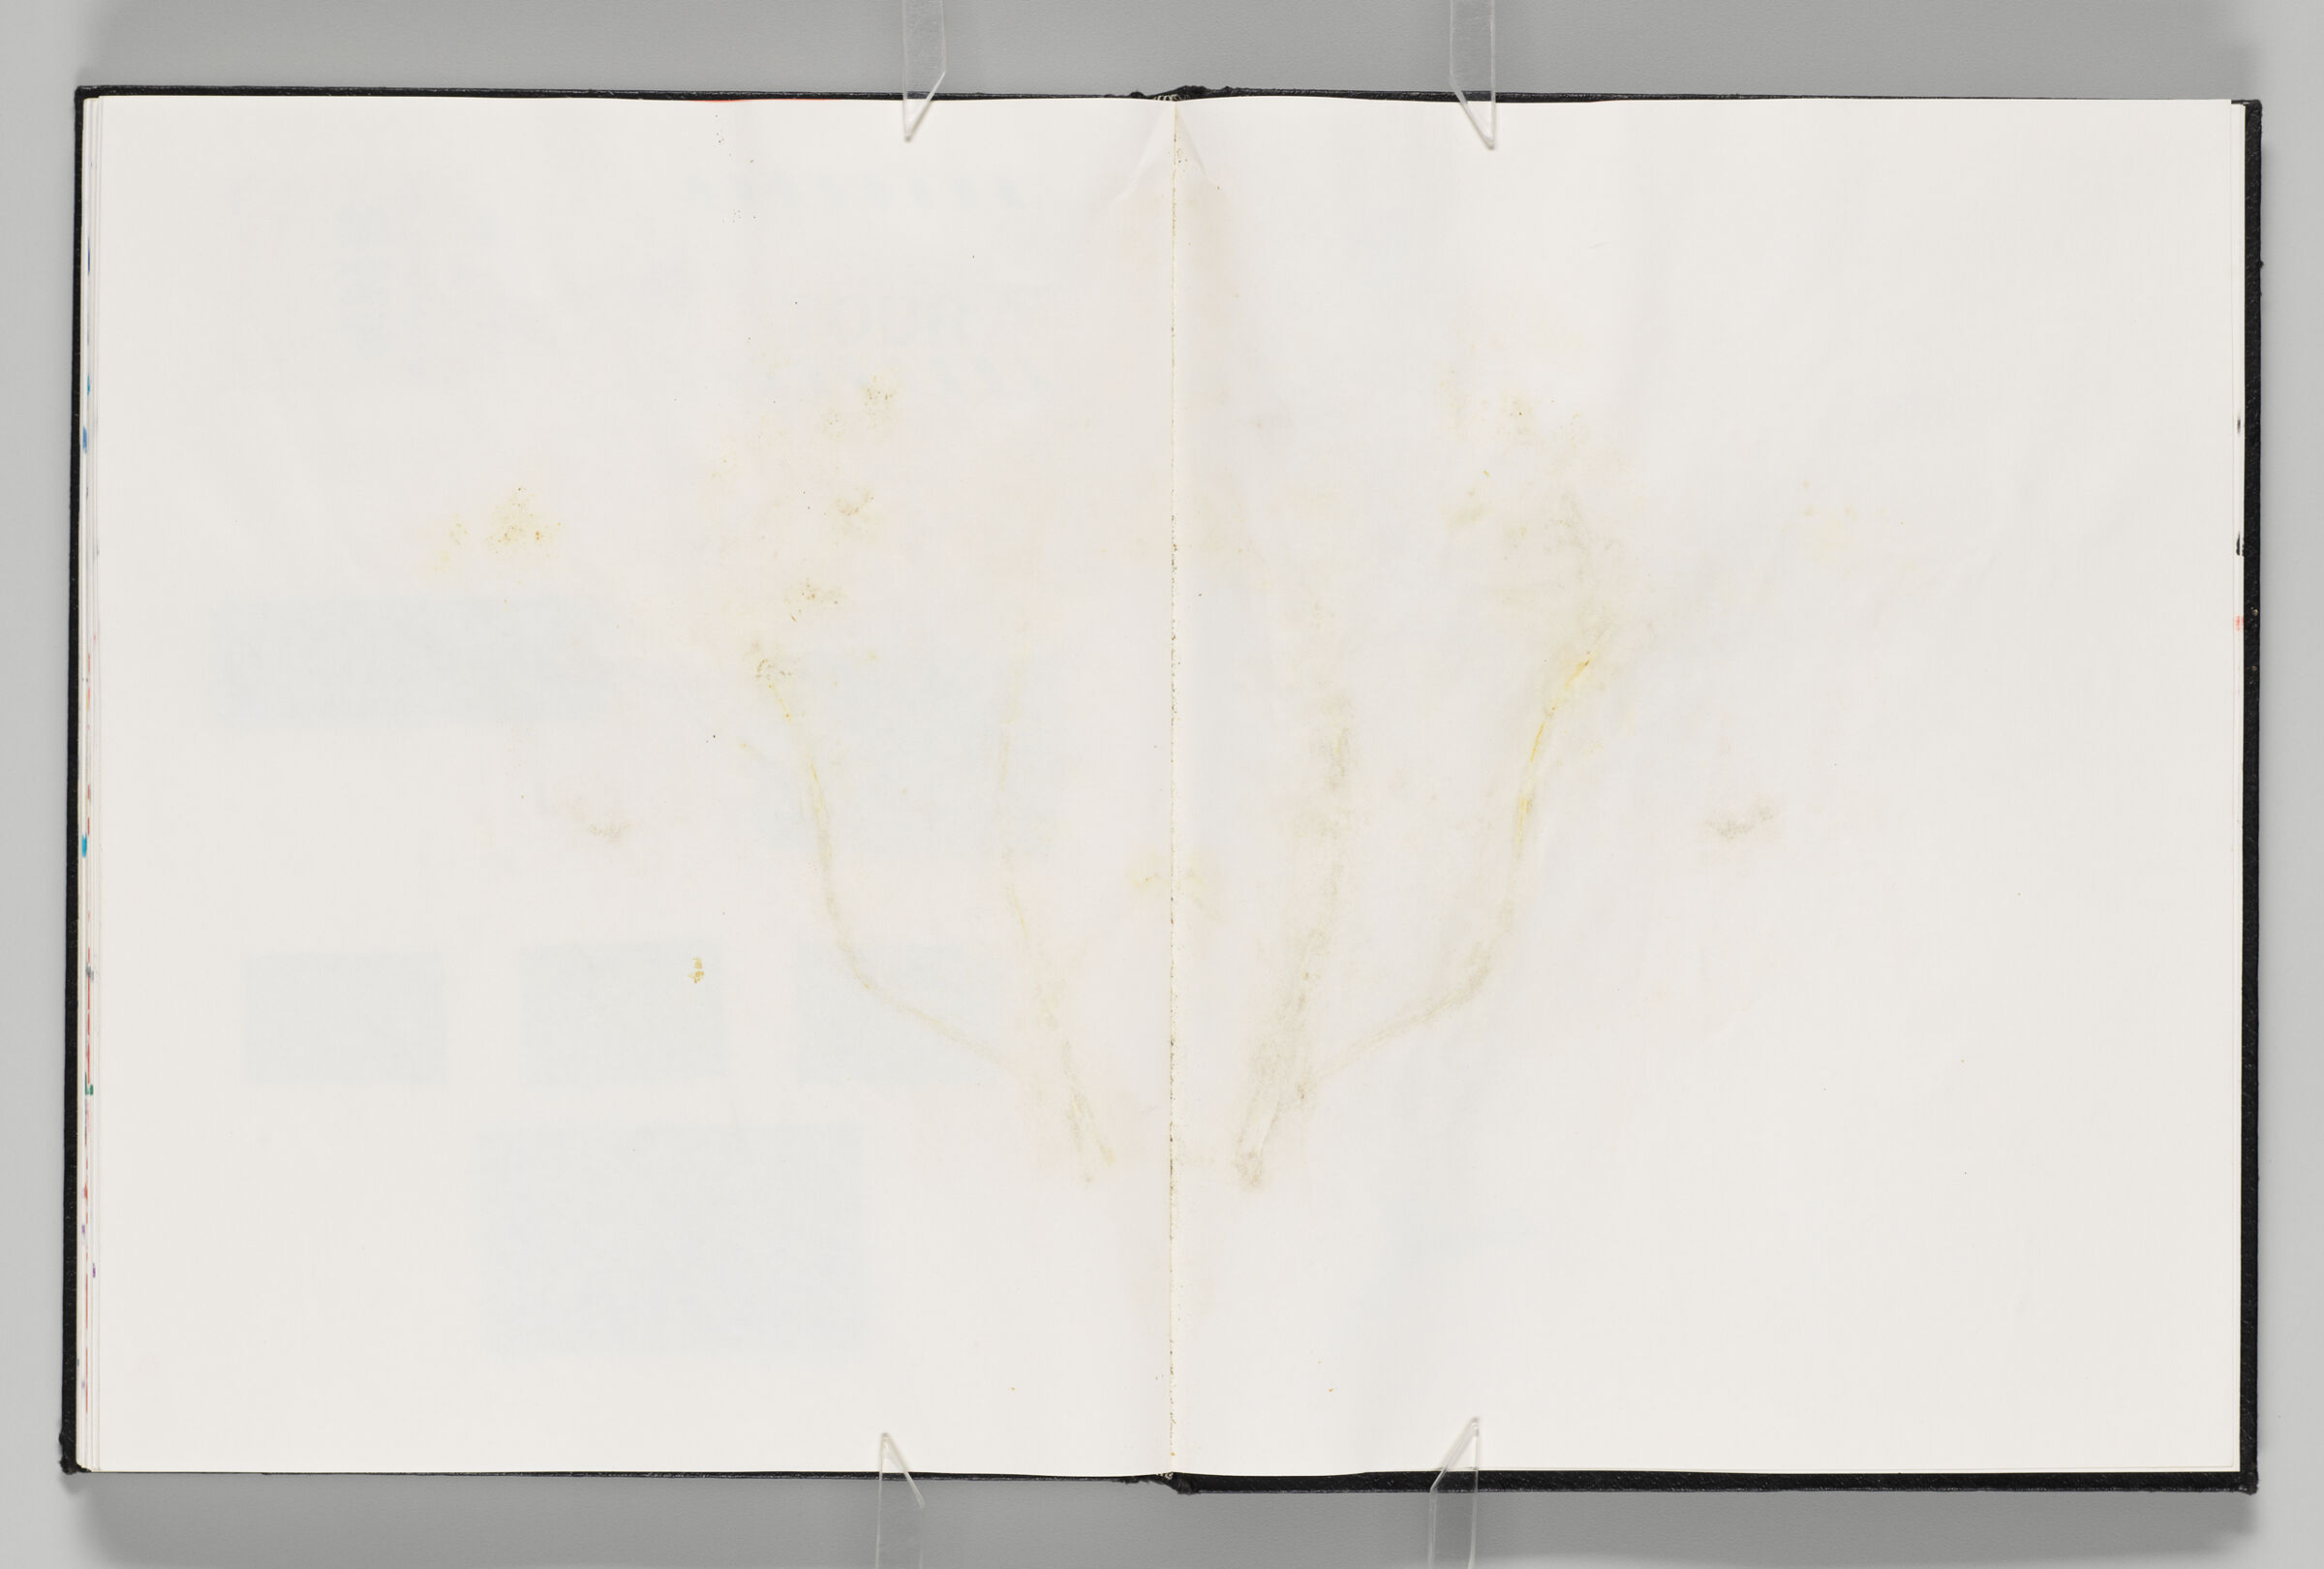 Untitled (Blank With Flower Stains, Left Page); Untitled (Blank With Flower Stains, Right Page)